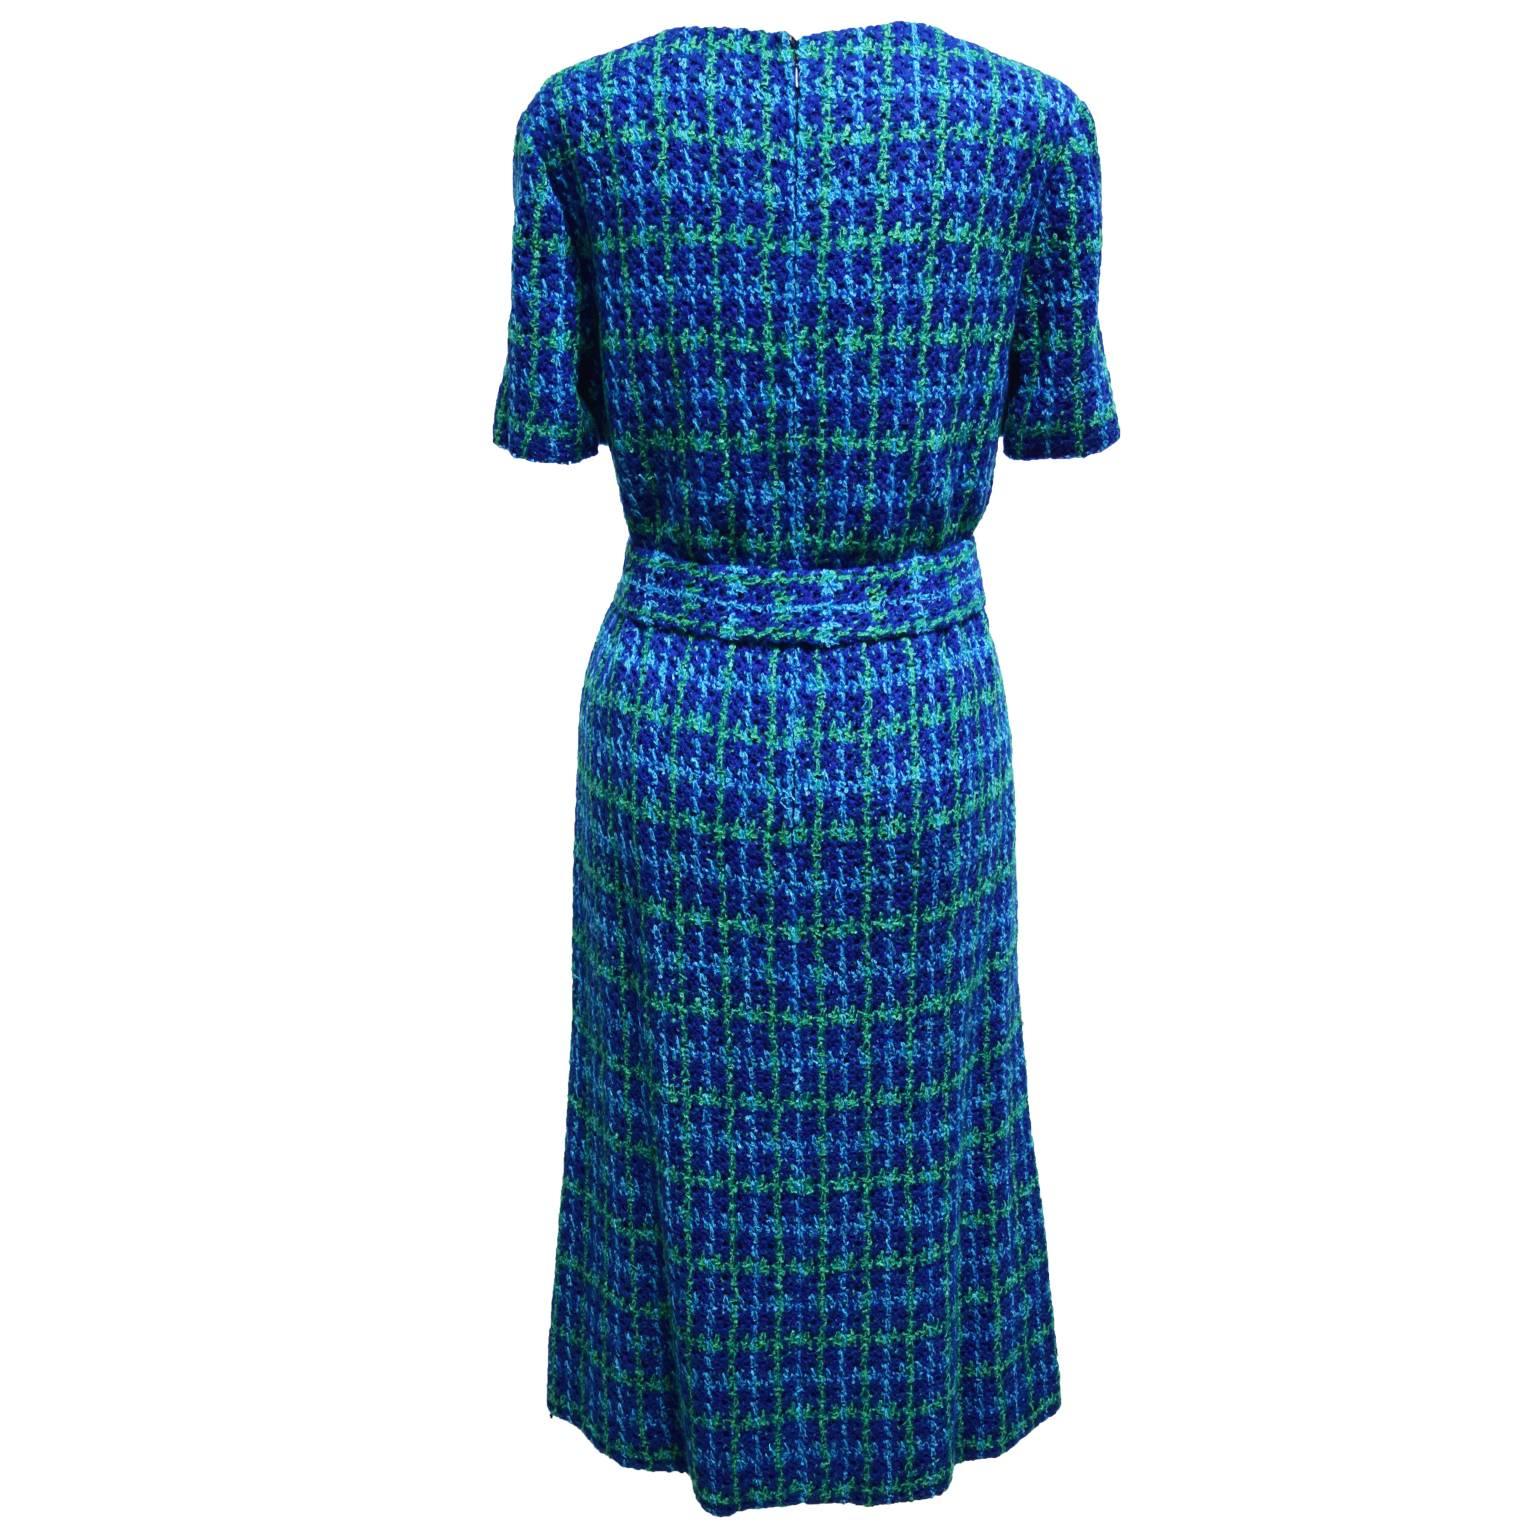 This dress and jacket ensemble is completely crocheted in Portugal. The jacket has blue button closures and two front pockets. The dress is a short sleeved V-neck sheath dress.